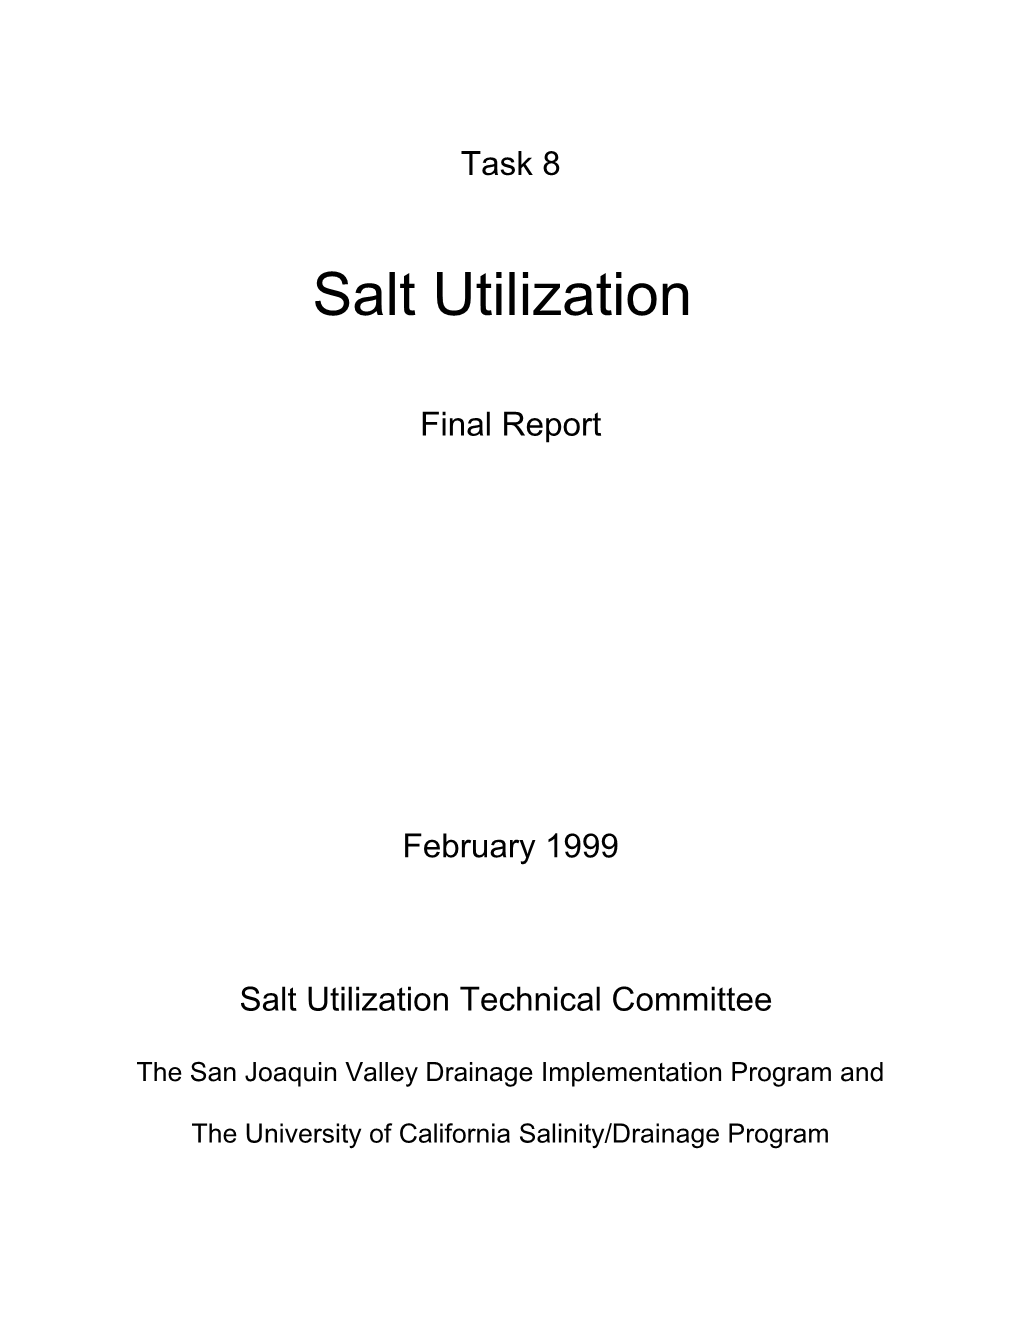 Report for the Salt Utilization Technical s1